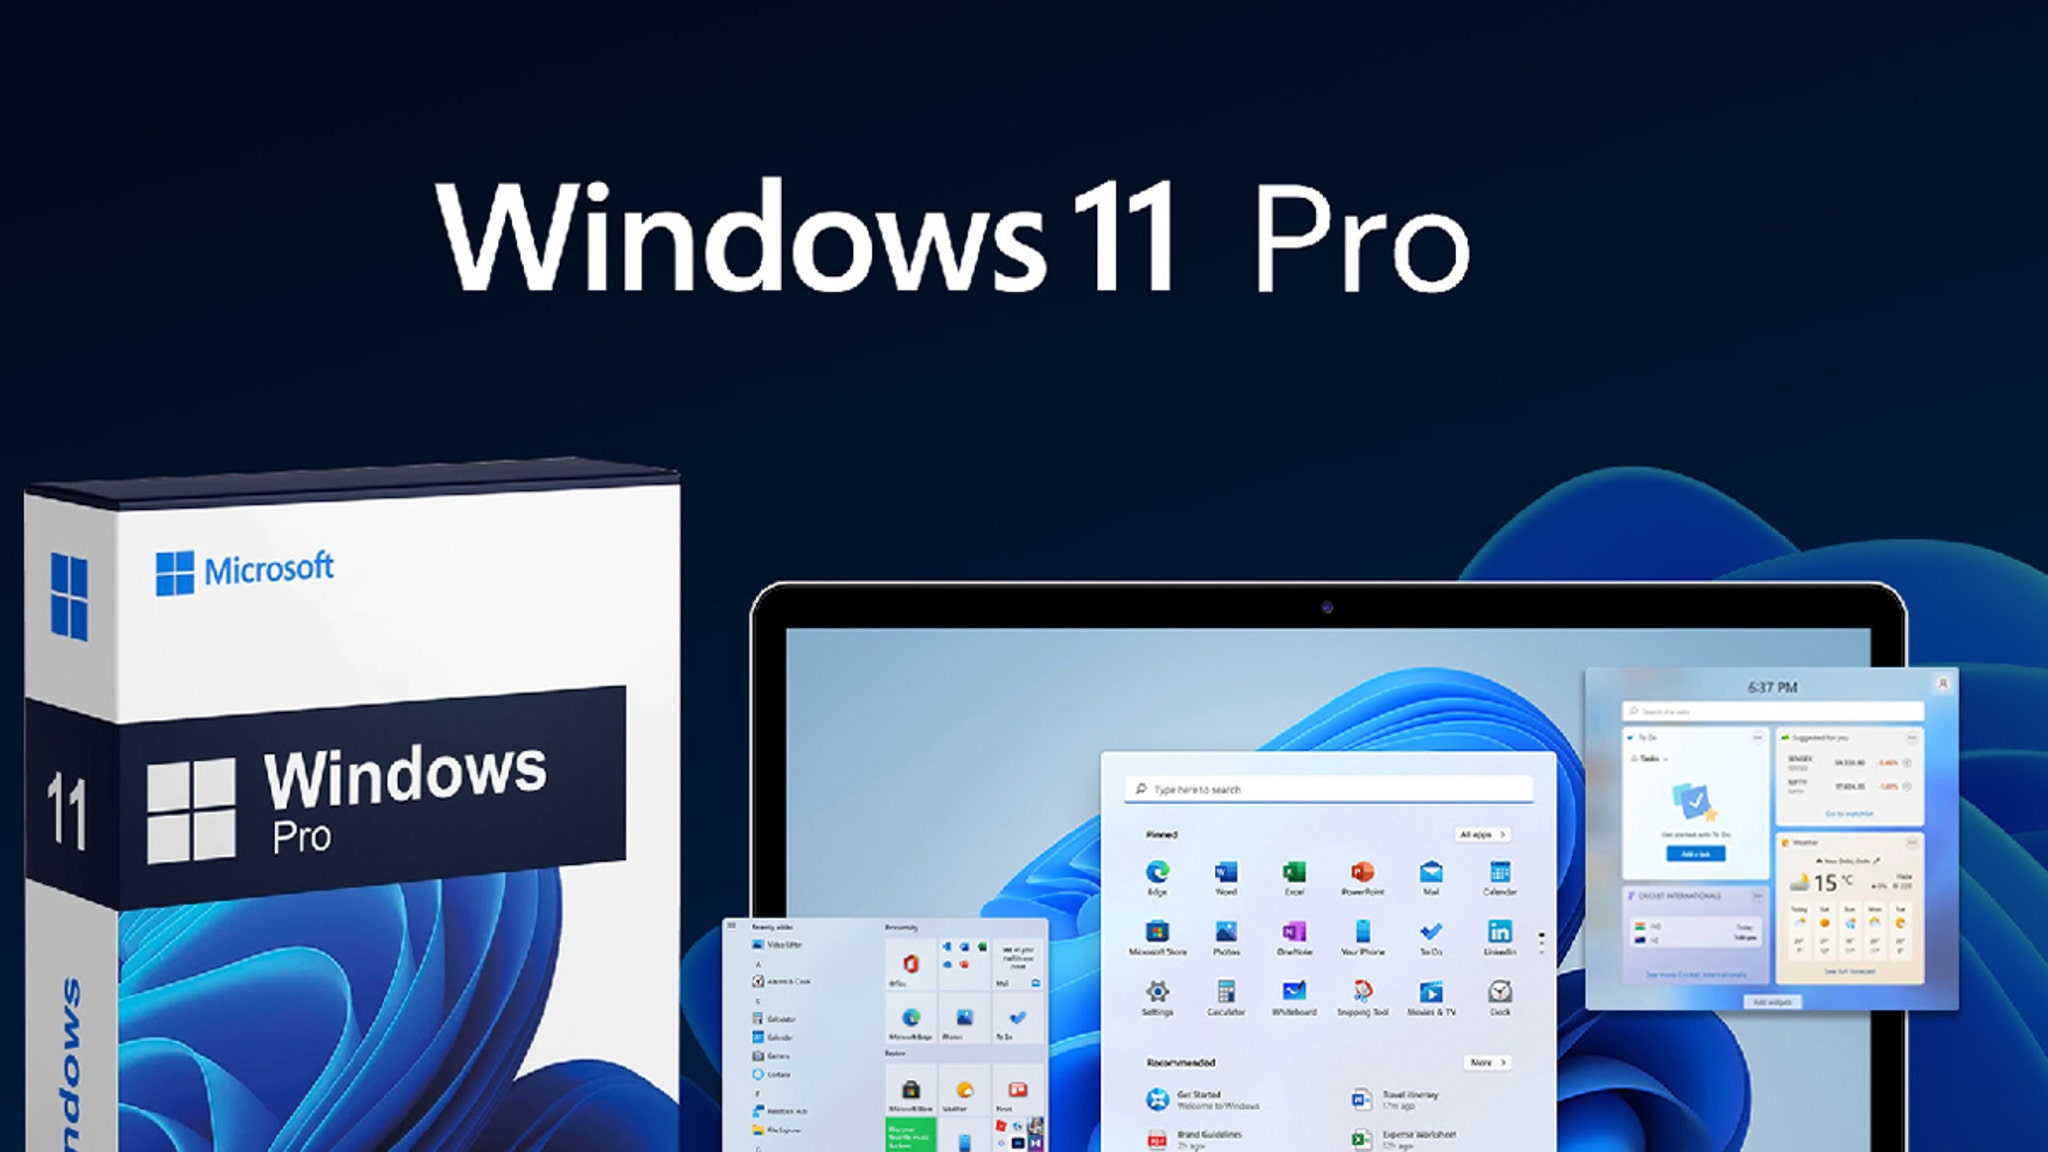 Windows 11 Pro drops to just $25 in this epic end-of-year deal